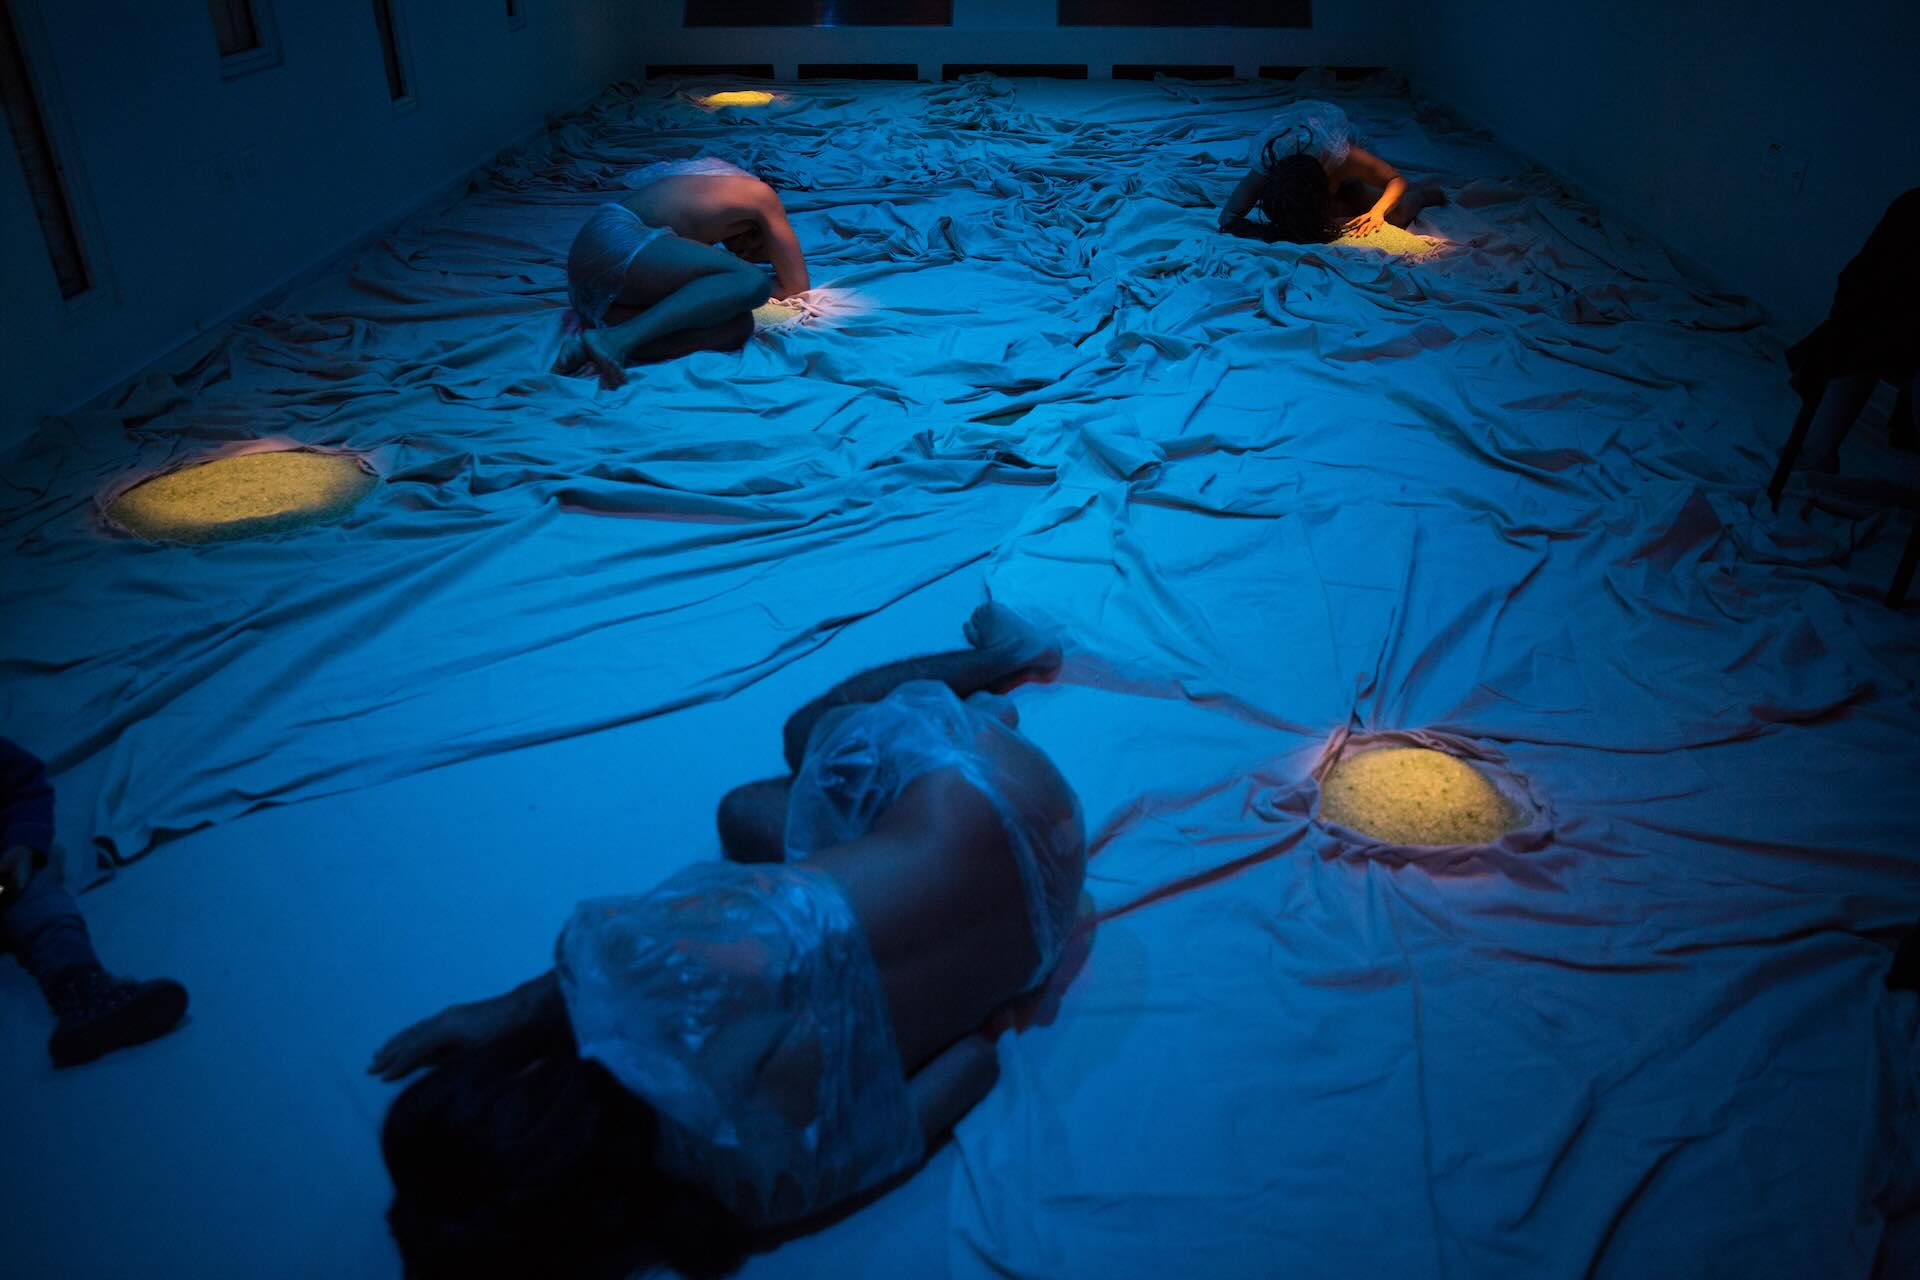 In a dimly lit scene bathed in blue, three dancers lie on a rumpled cloth floor